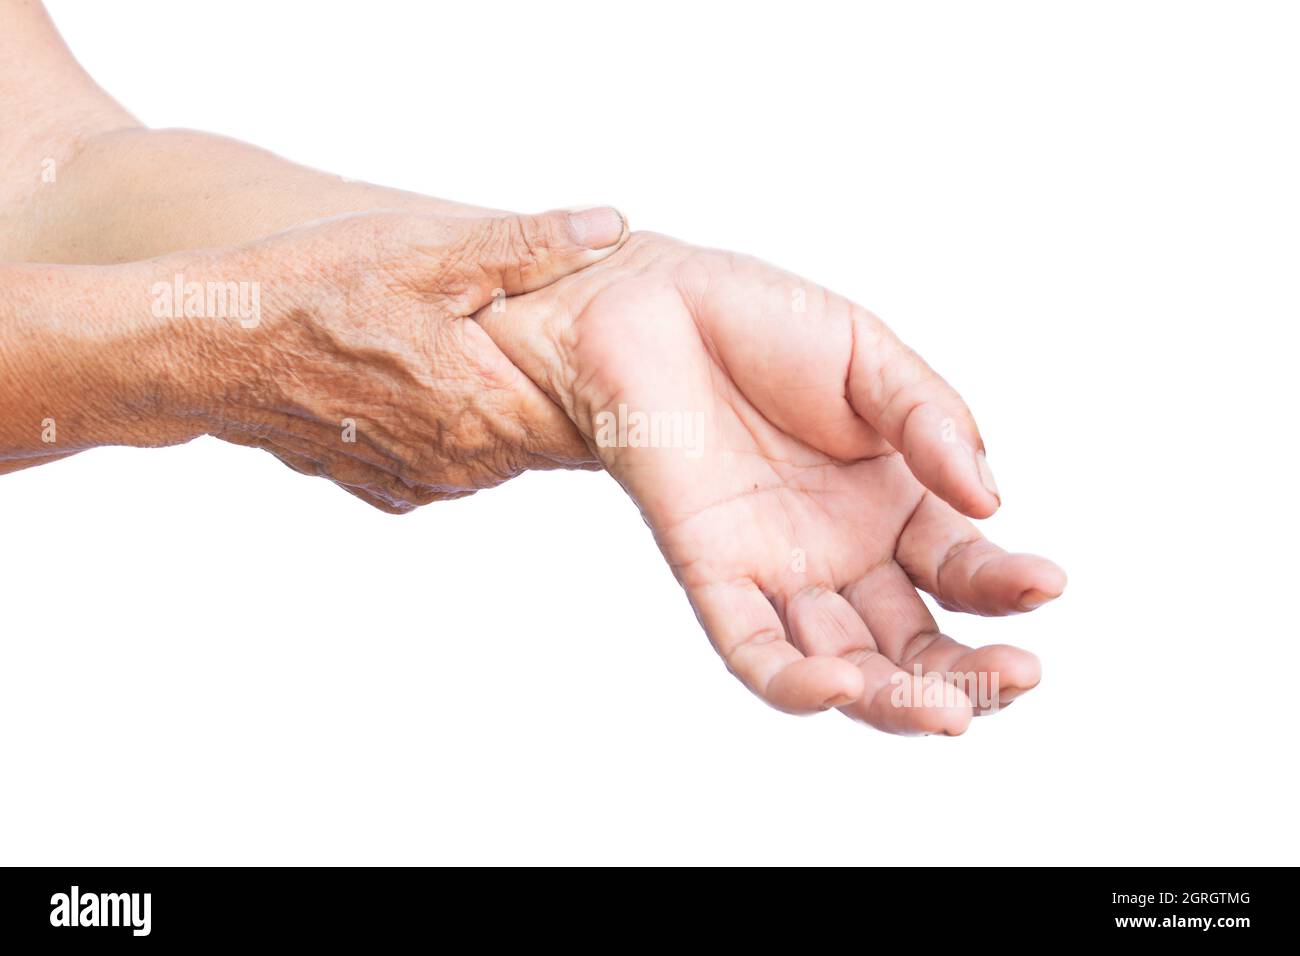 Cropped Image Of Senior Woman With Hand Pain Against White Background Stock Photo